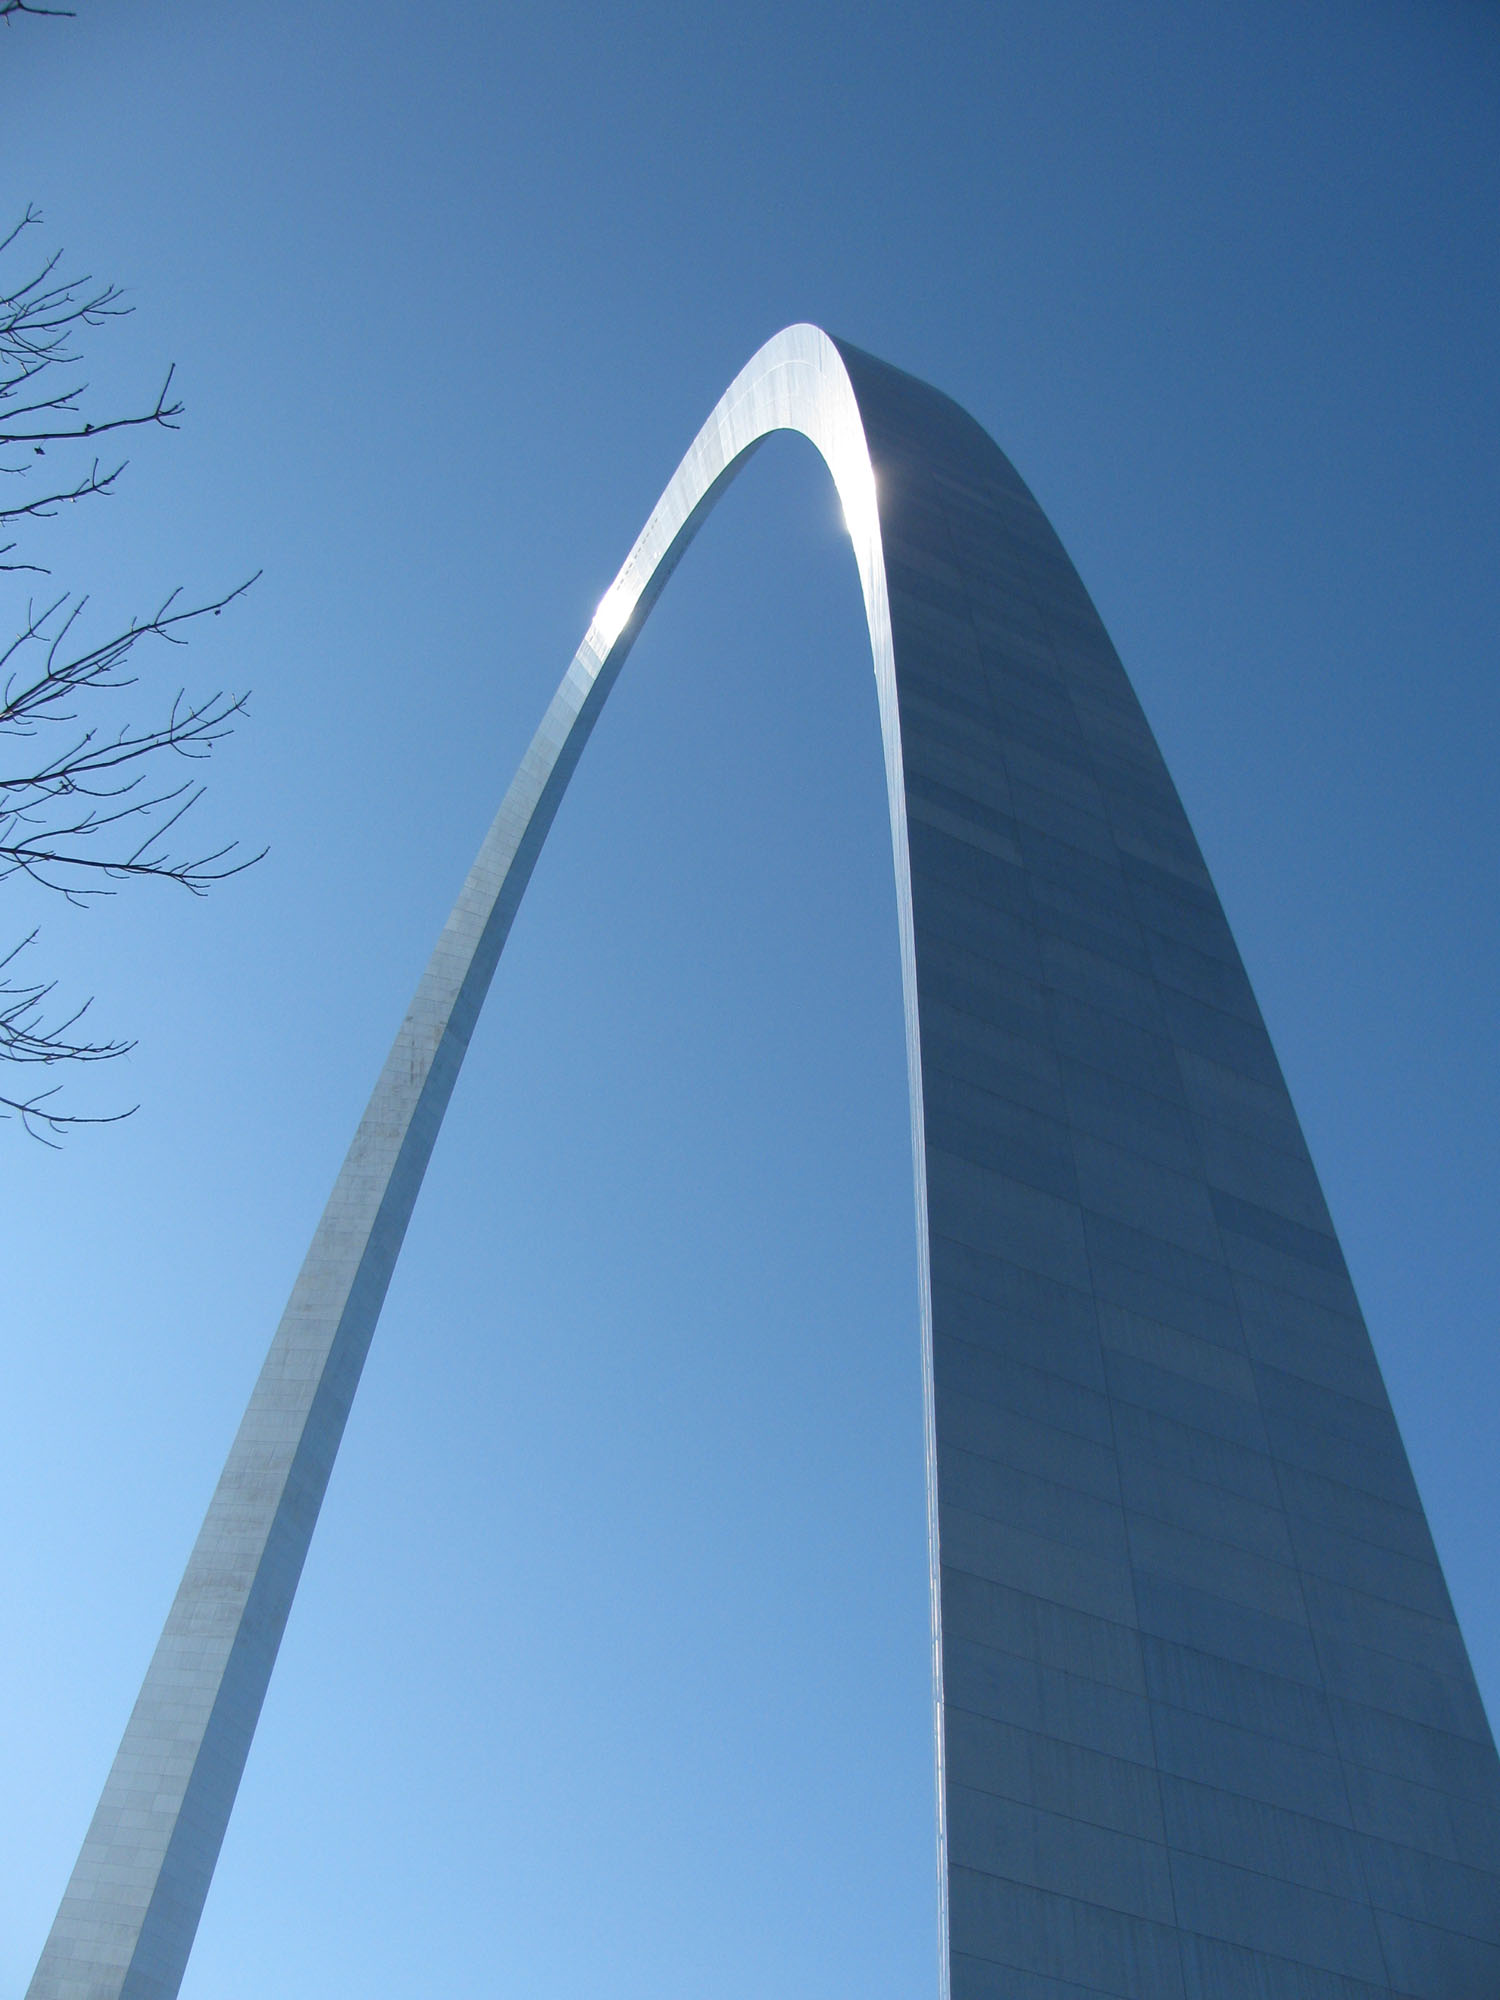 Stainless Steel in St Louis | Around and About with Viv